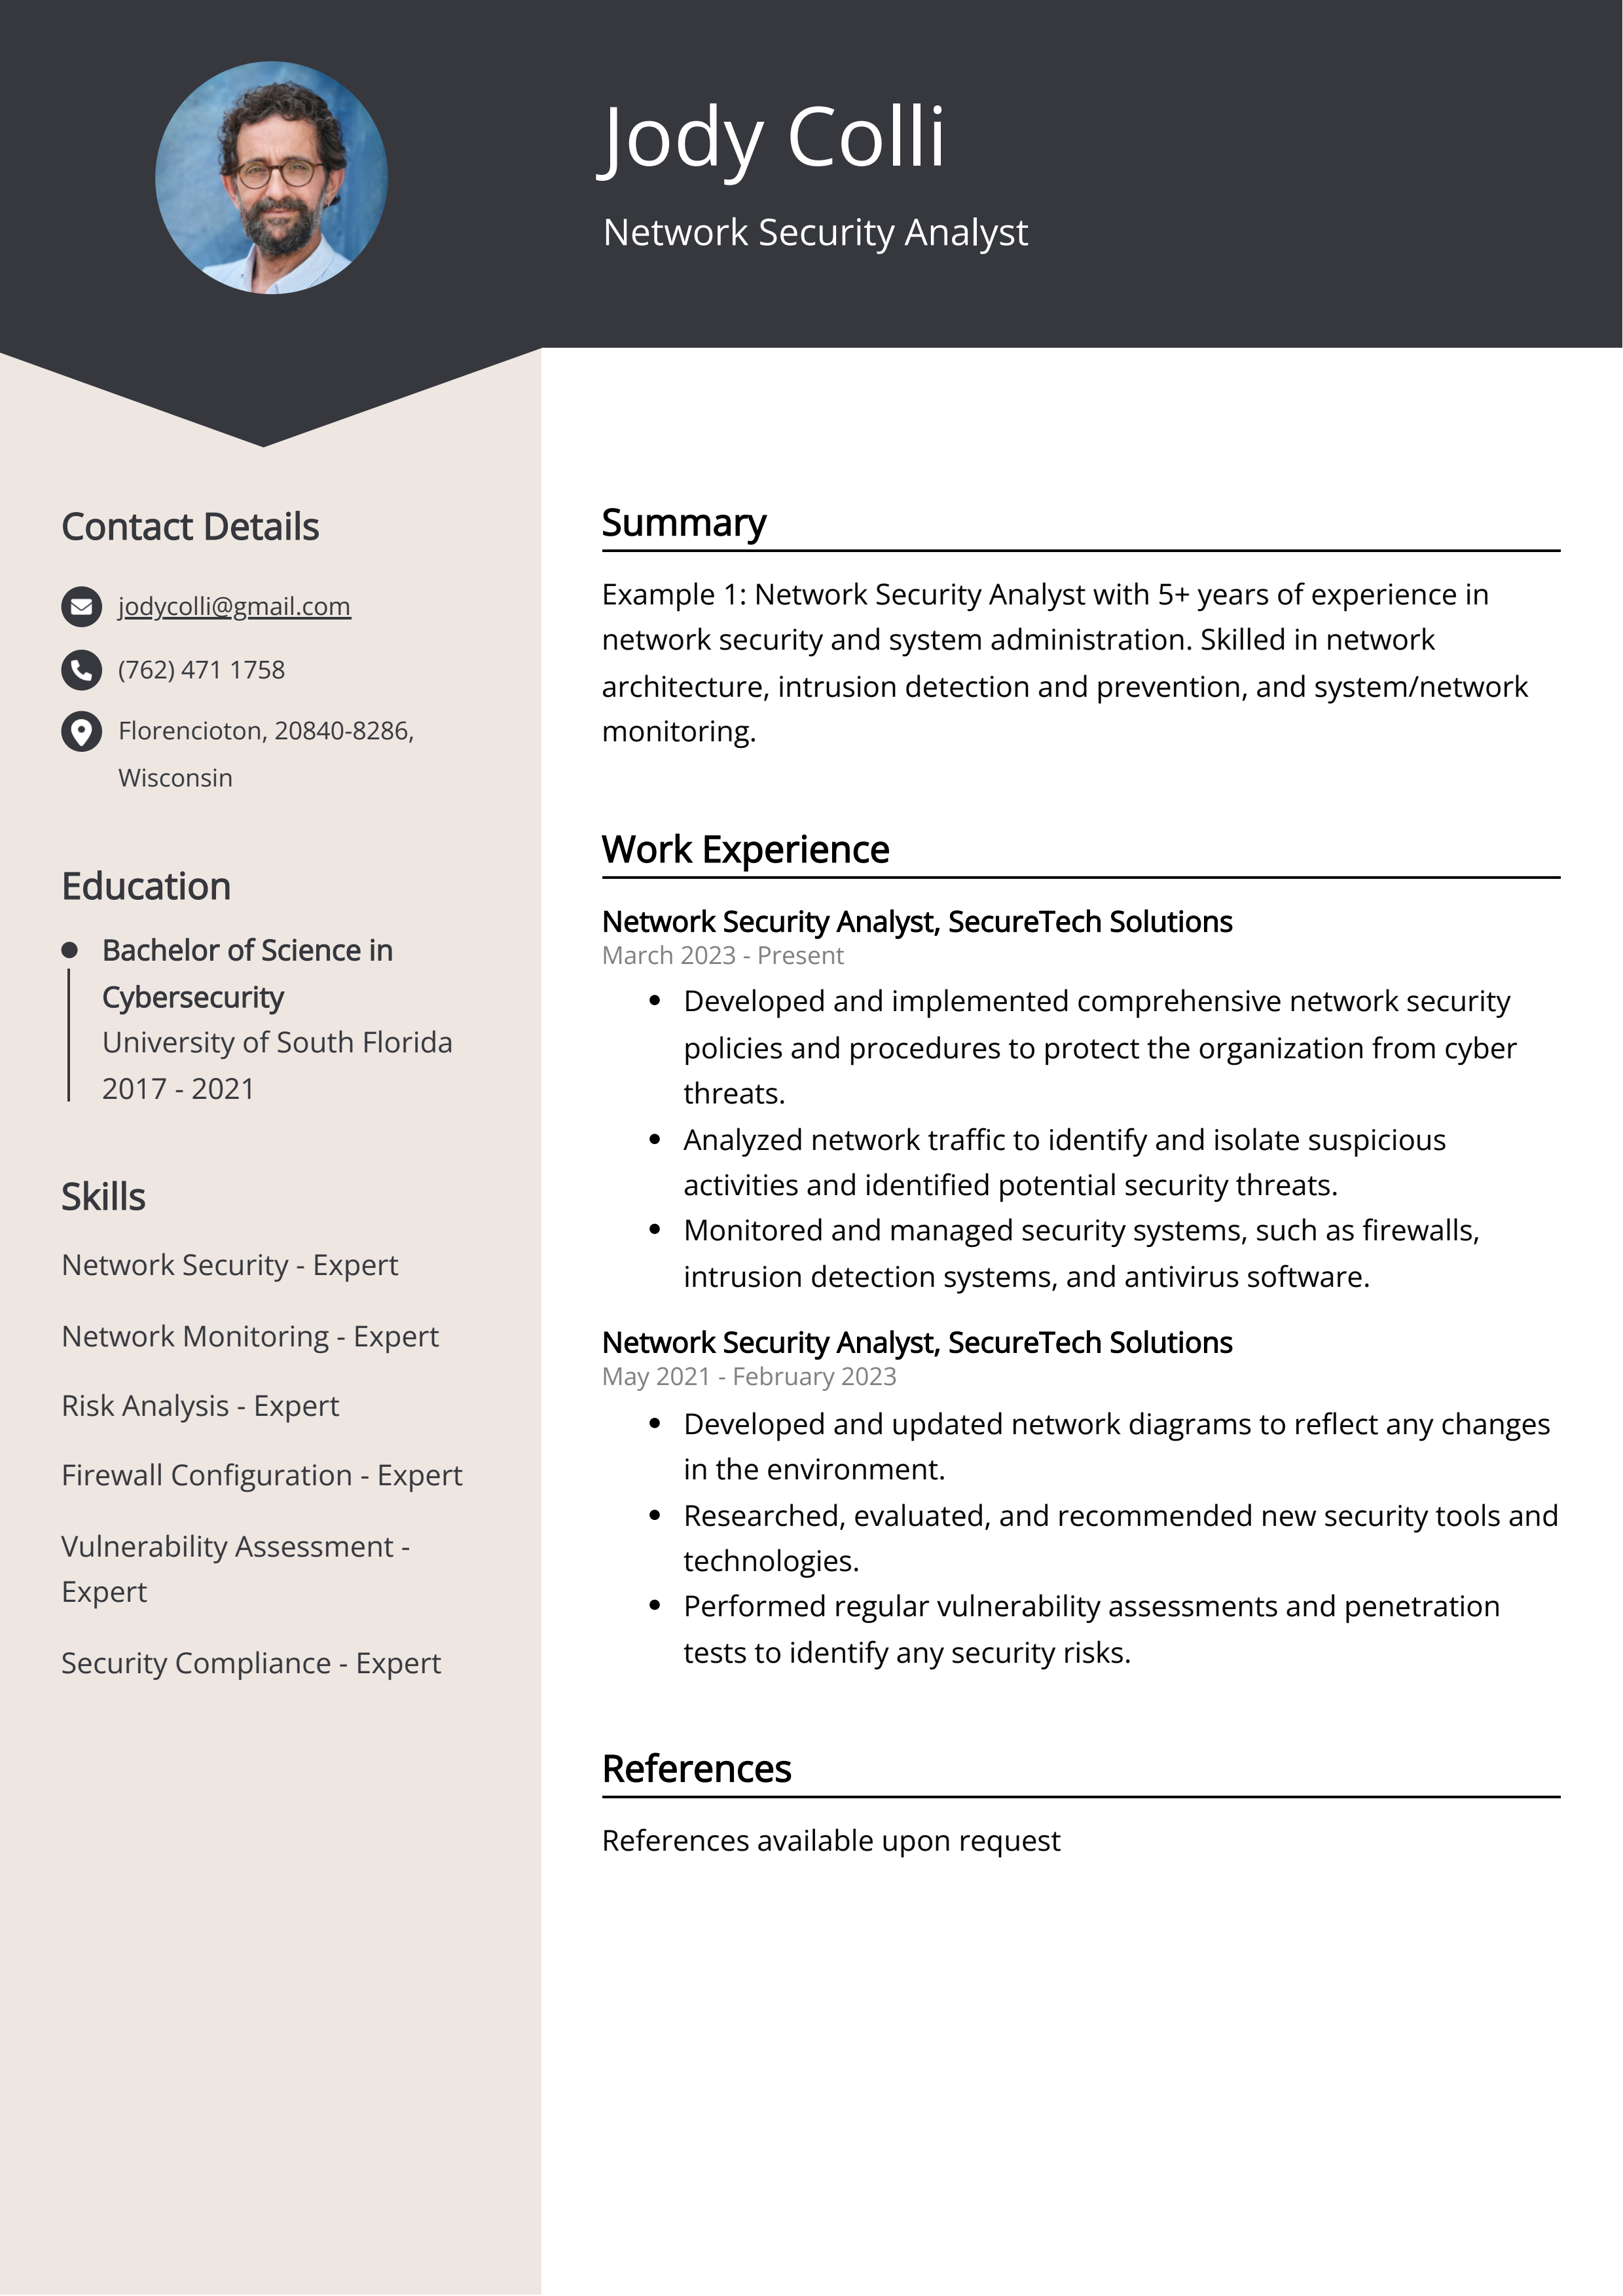 Network Security Analyst CV Example